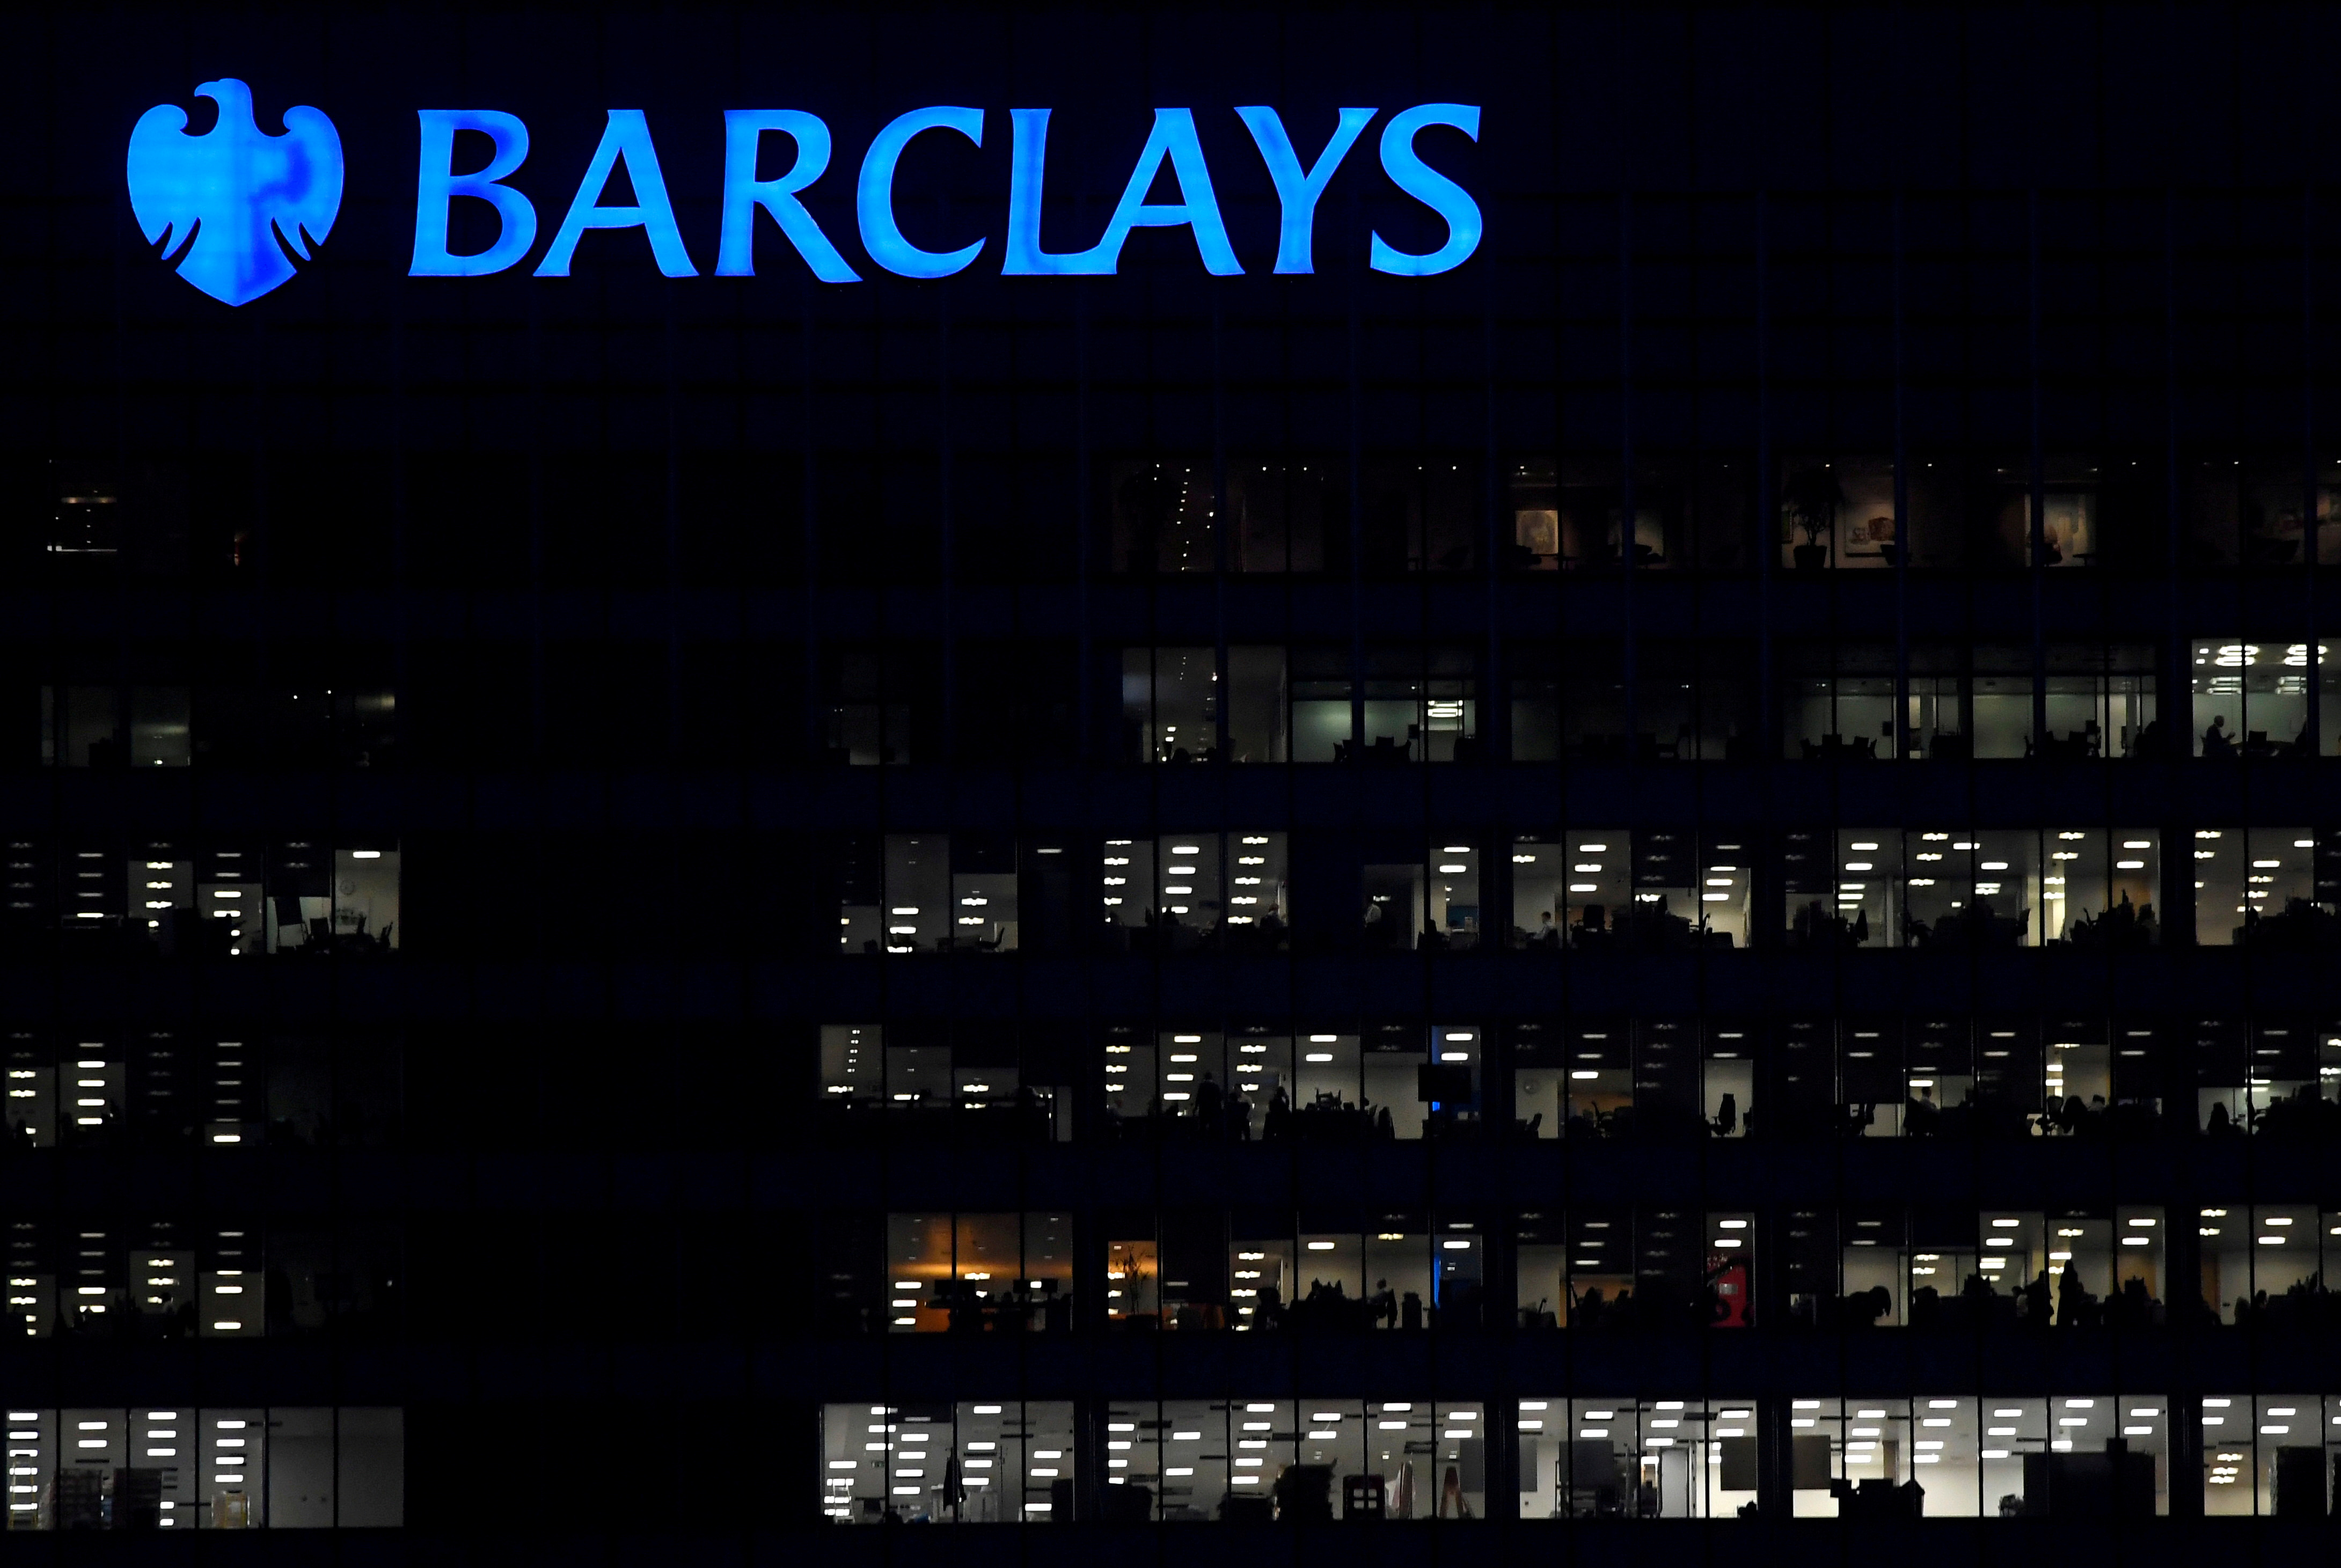 Workers are seen at Barclays bank offices in the Canary Wharf financial district in London